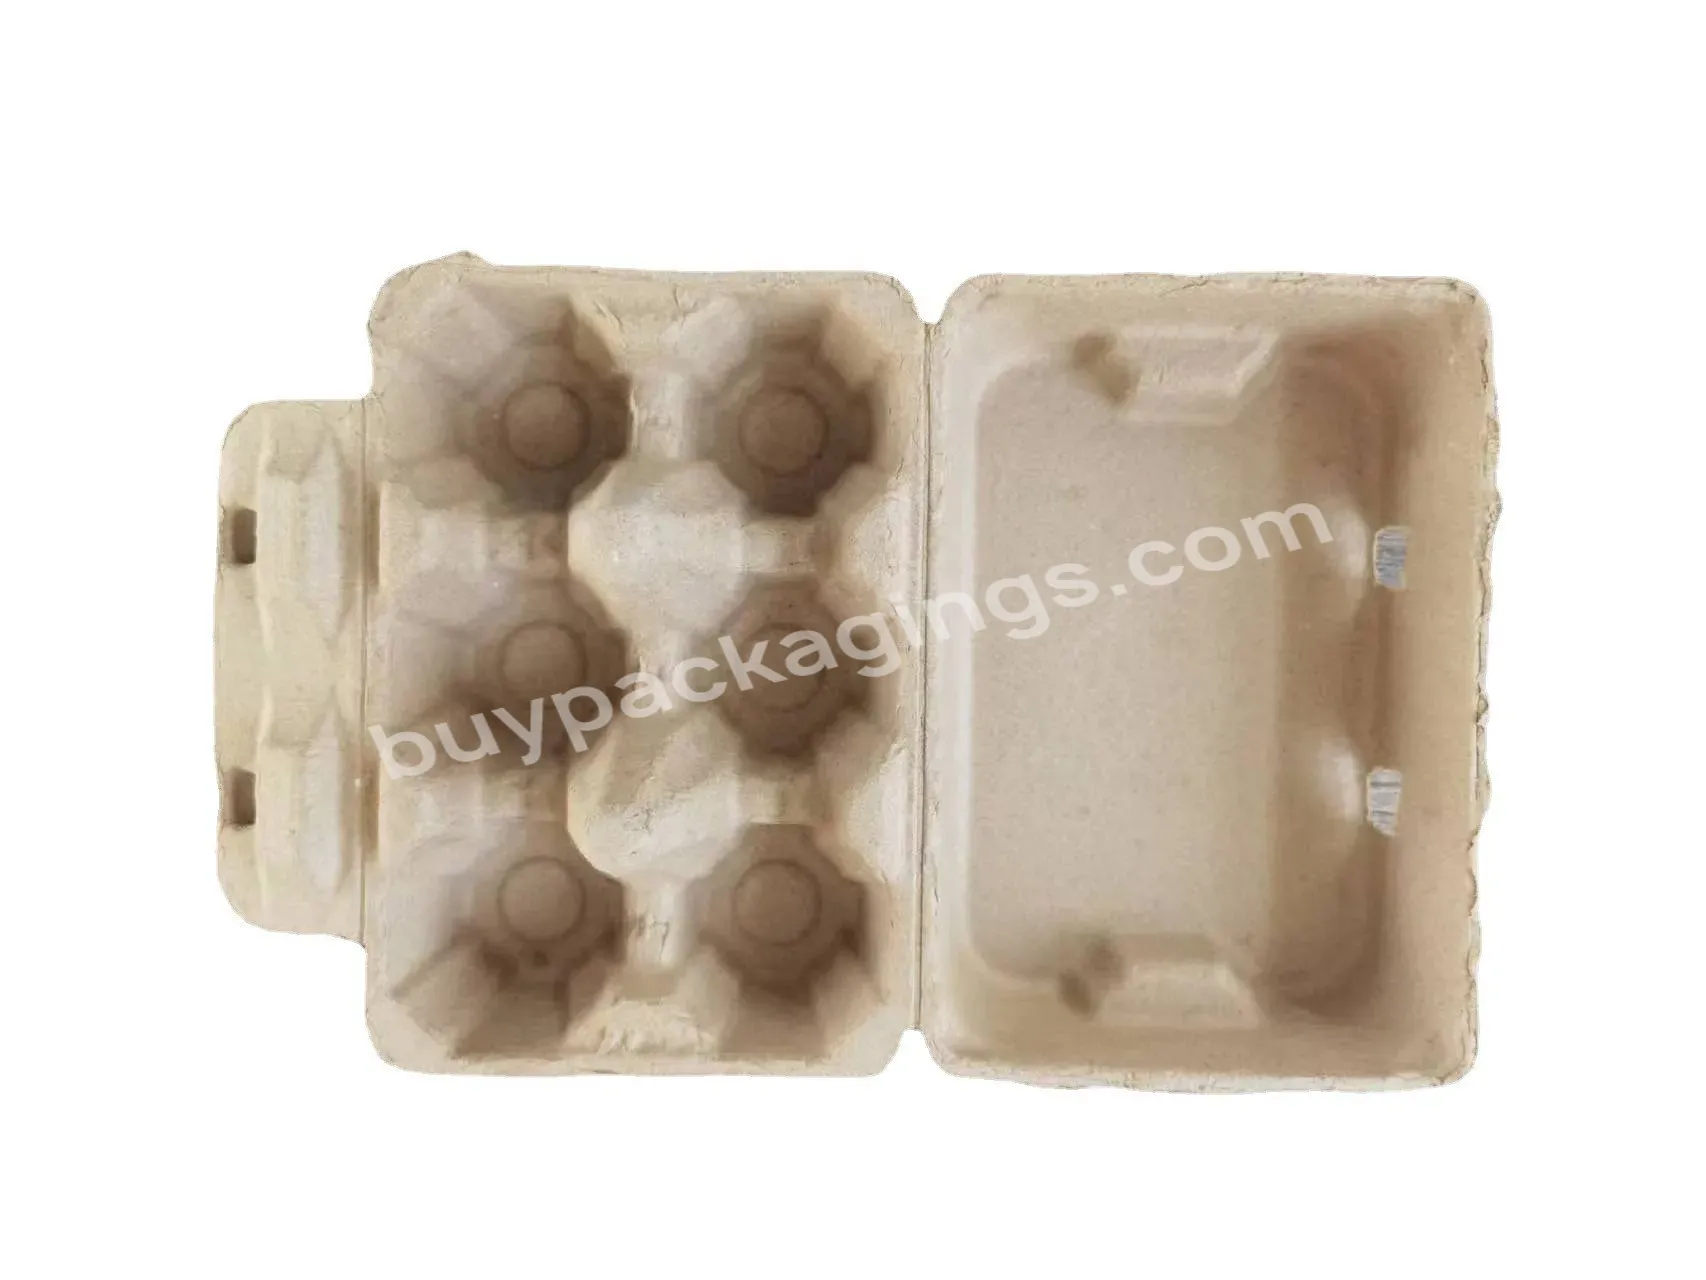 6 Hole Duck Egg Box Environmental Protection Degradable Paper Pulp Household Large Capacity Large Size 6 Pack Duck Eggs